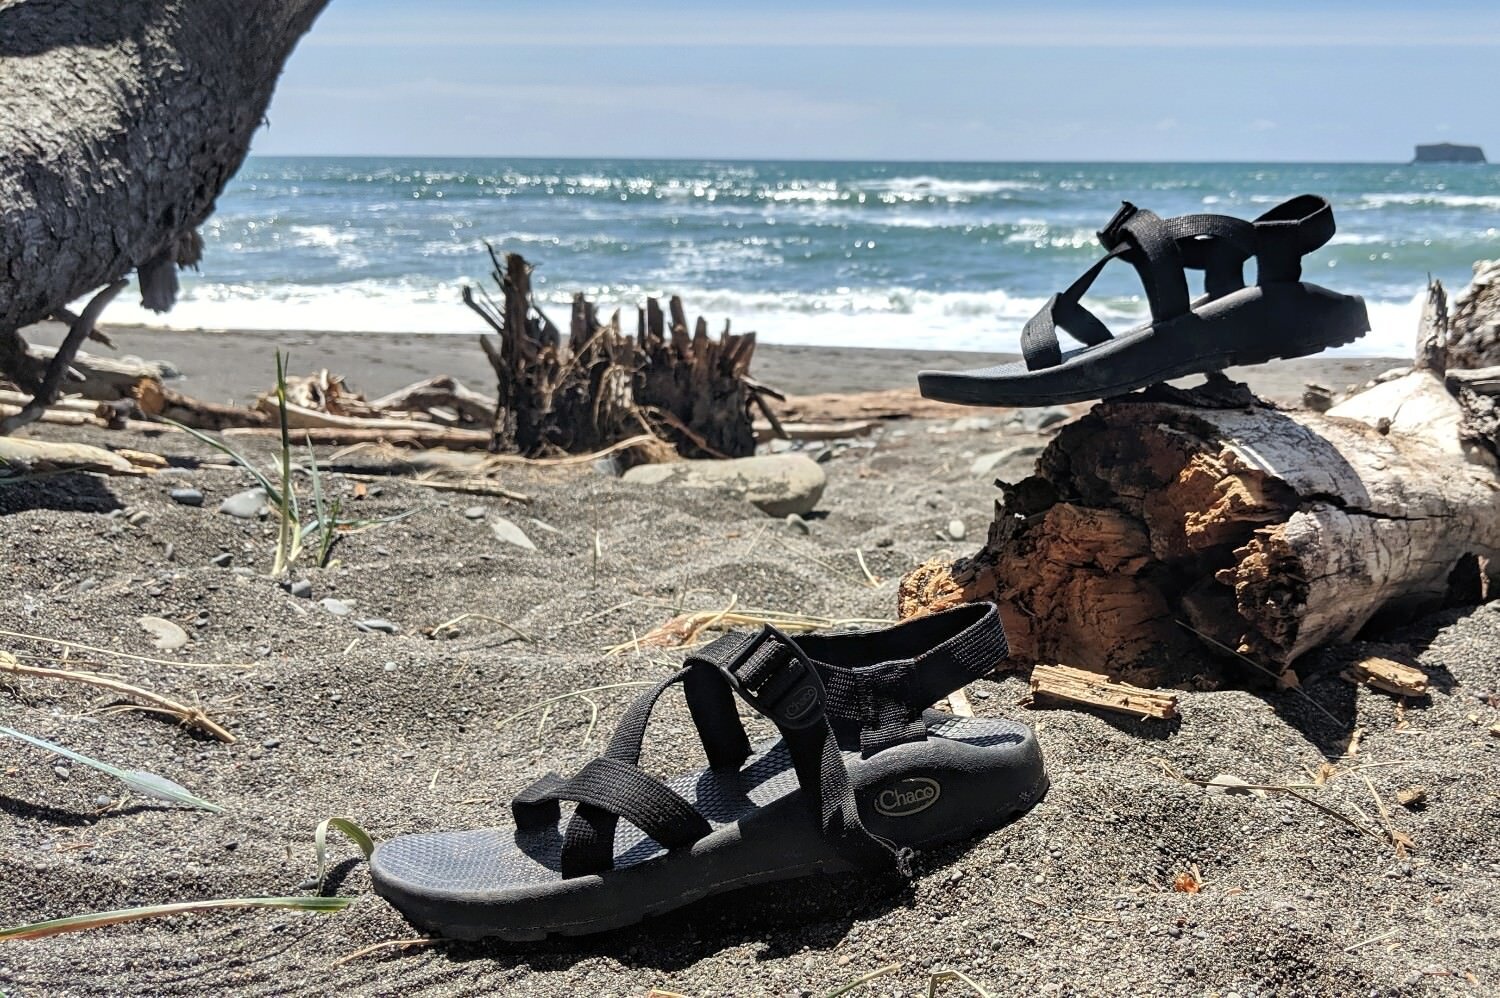 Hiking sandals are great for hot, summer hikes because they help keep your feet cool.